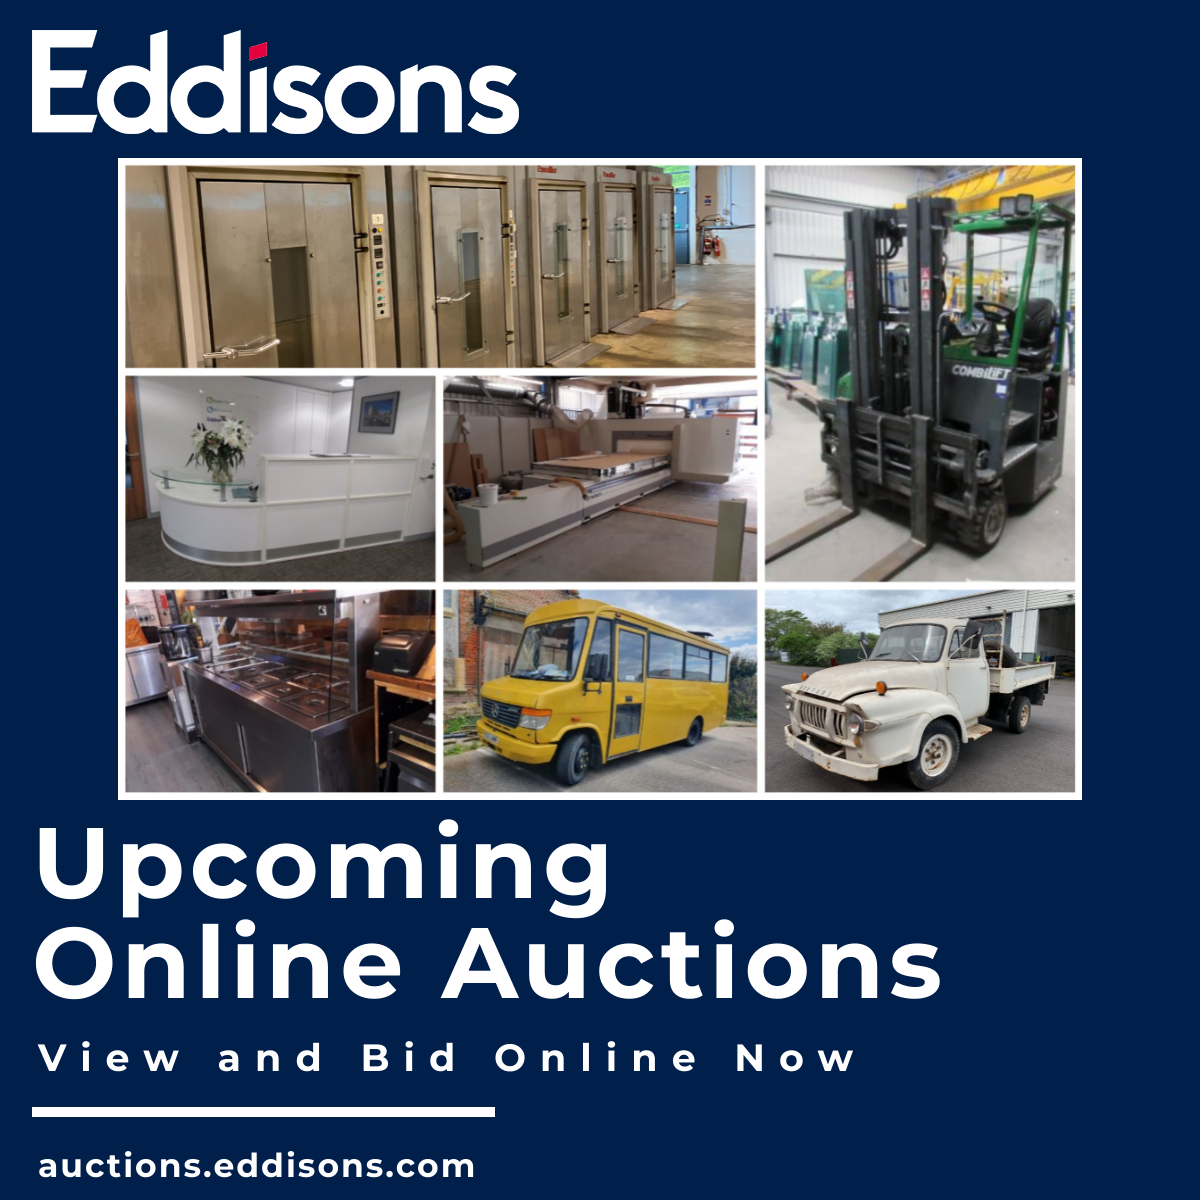 Upcoming Auctions with Eddisons

For further information visit eddisons.com 

#auctioneer #upcoming #onlineauction #happybidding #restaurant #chiller #catering #yacht #joinery #windowanddoor #industrial #BedfordPickUpTruck #Frenchbakery  #officefurniture #Mercedes